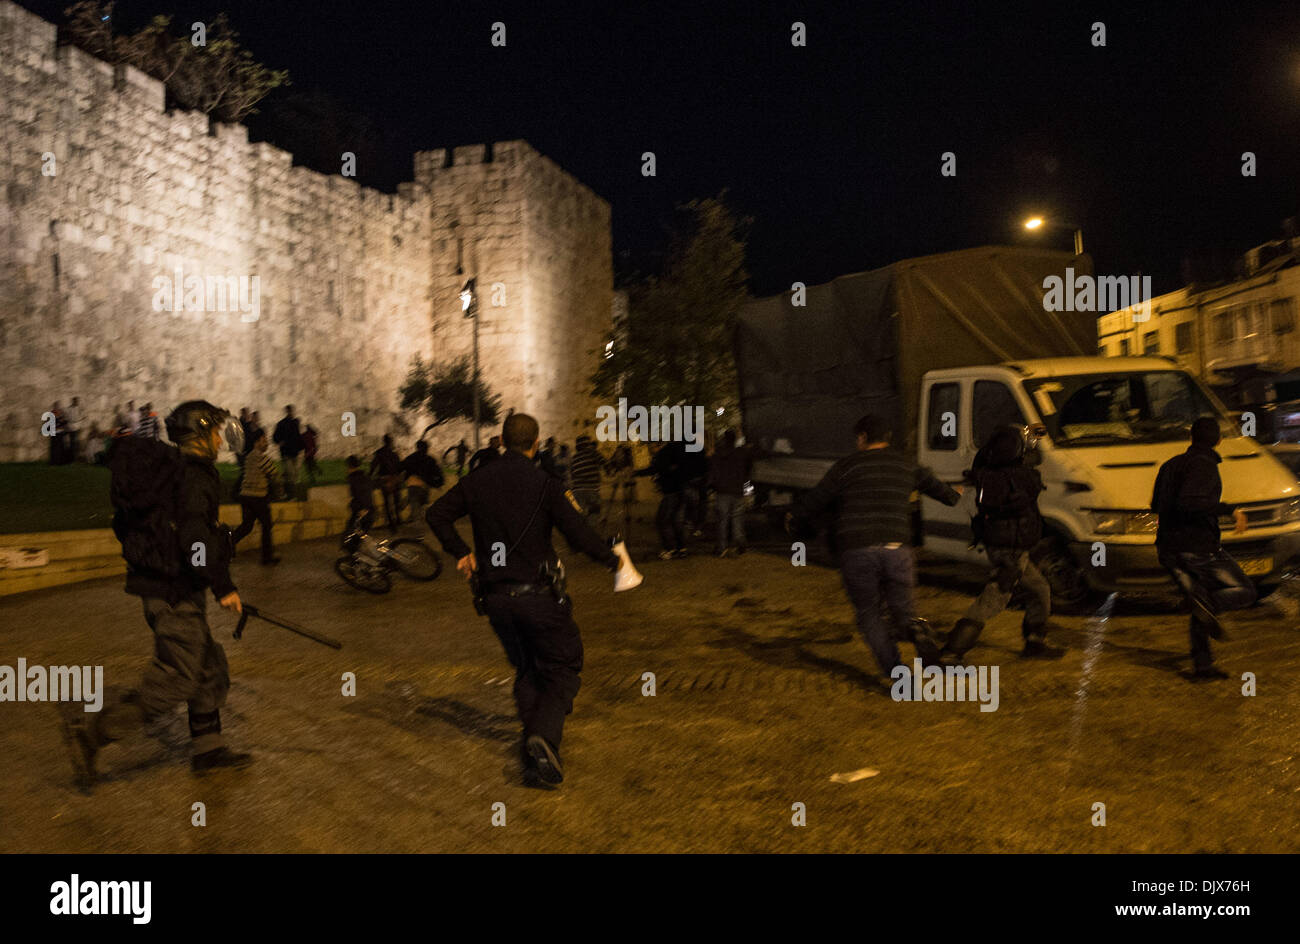 (131201) -- JERUSALEM, Dec. 1, 2013 (Xinhua) -- Israeli border police use batons to disperse demonstrators in front of the Herod's Gate in the Old City of Jerusalem, on Nov. 30, 2013. Thousands of Israelis took to the streets across the country on Saturday to protest against a government plan to displace some 40,000 Arab Bedouins from their lands. (Xinhua/Li Rui) (ybg) Stock Photo